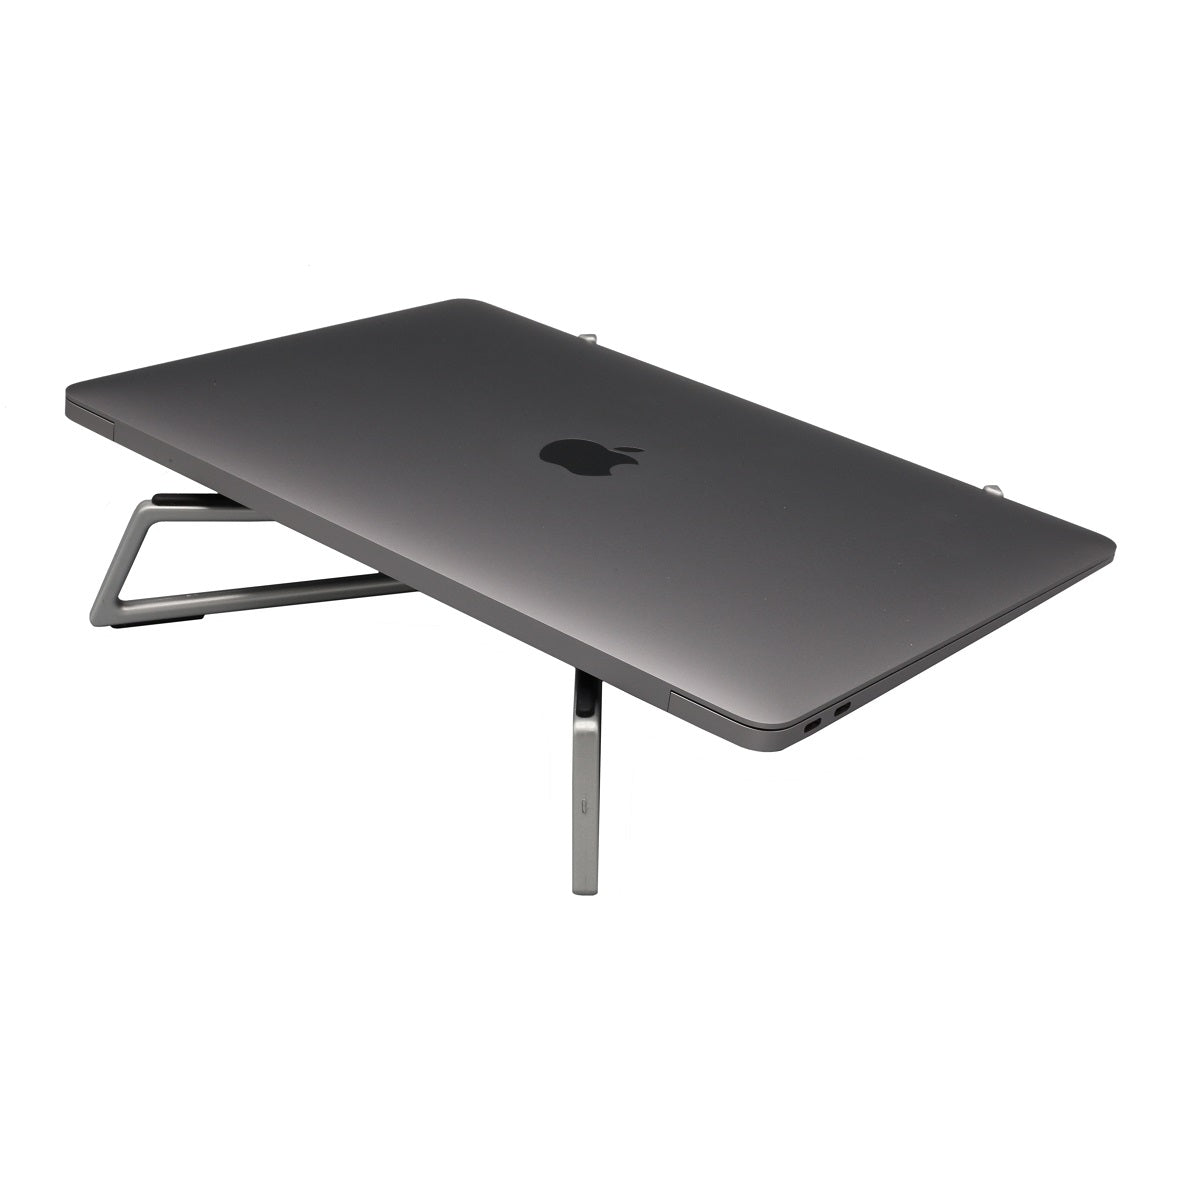 The silver FlexVerk portable laptop stand is shown holding a closed Macbook Air on a white background.